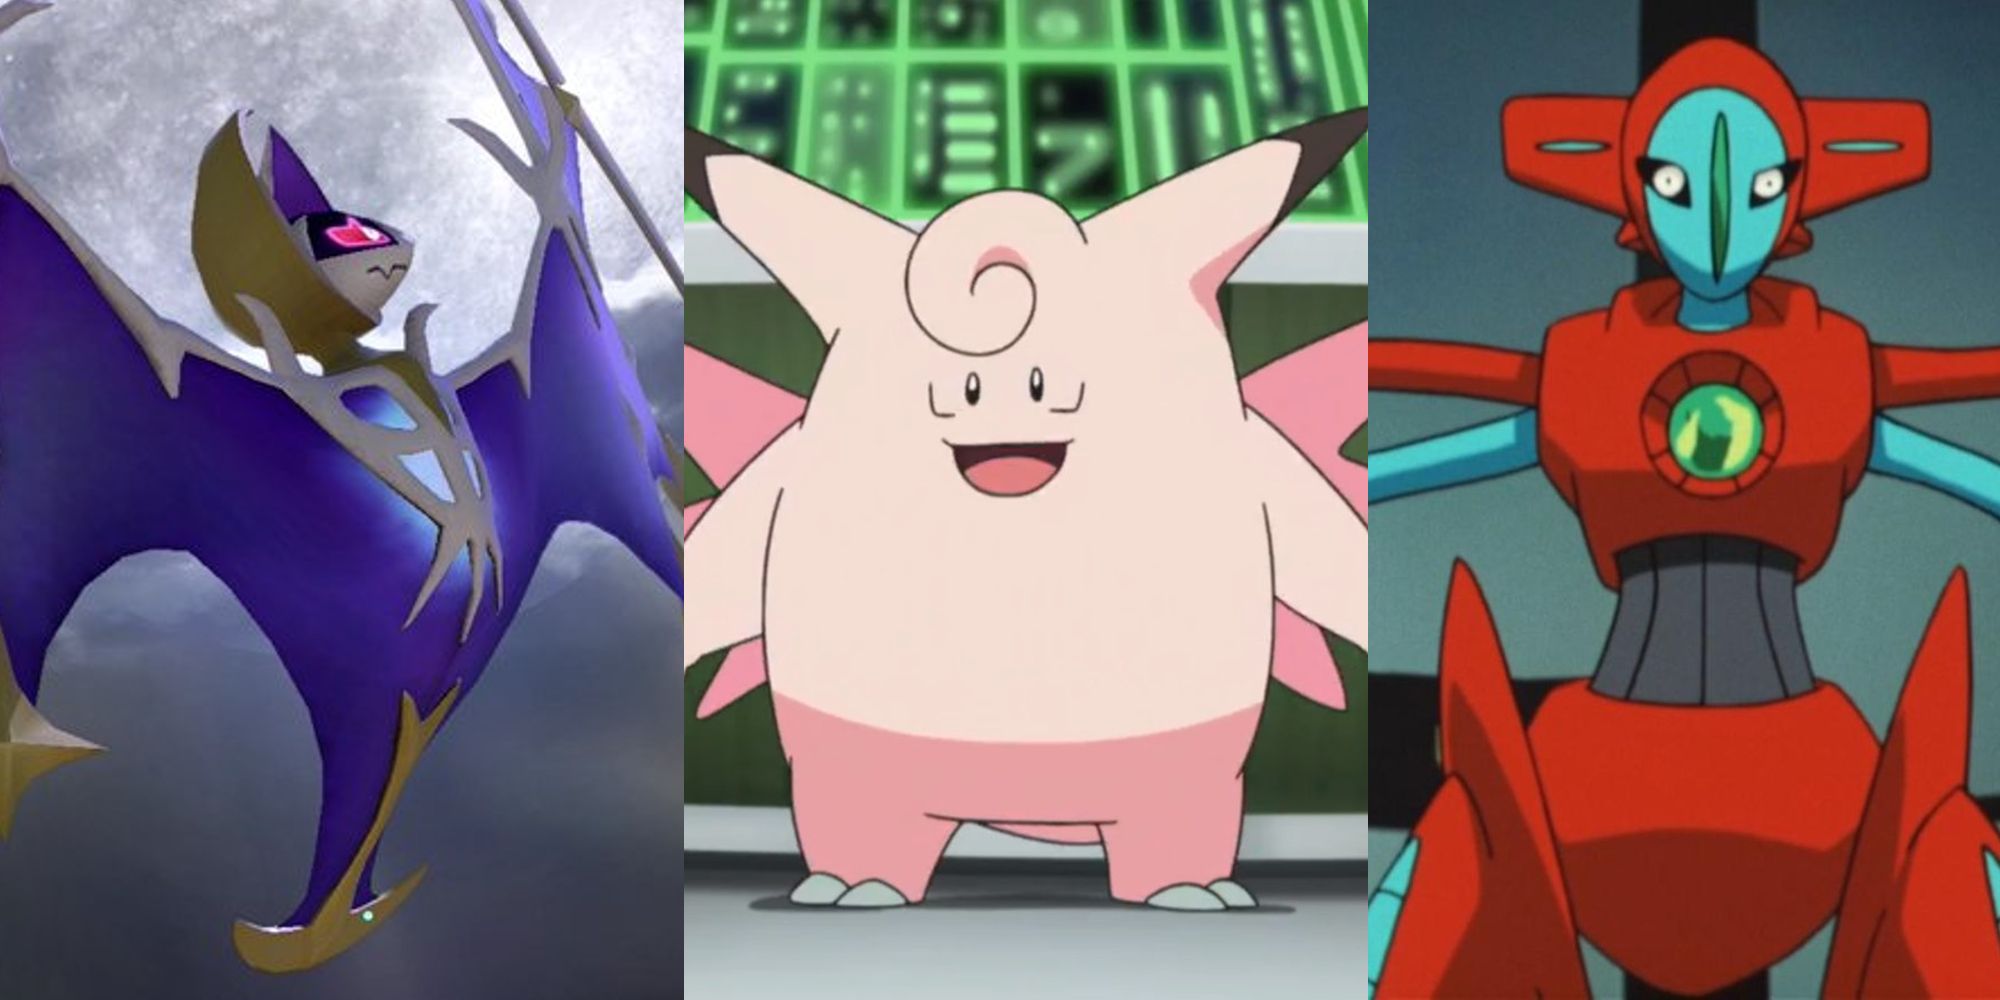 Lunala in the sky in Super Smash Bros Ultimate; Clefable from the Pokemon anime; Deoxys in the Pokemon anime